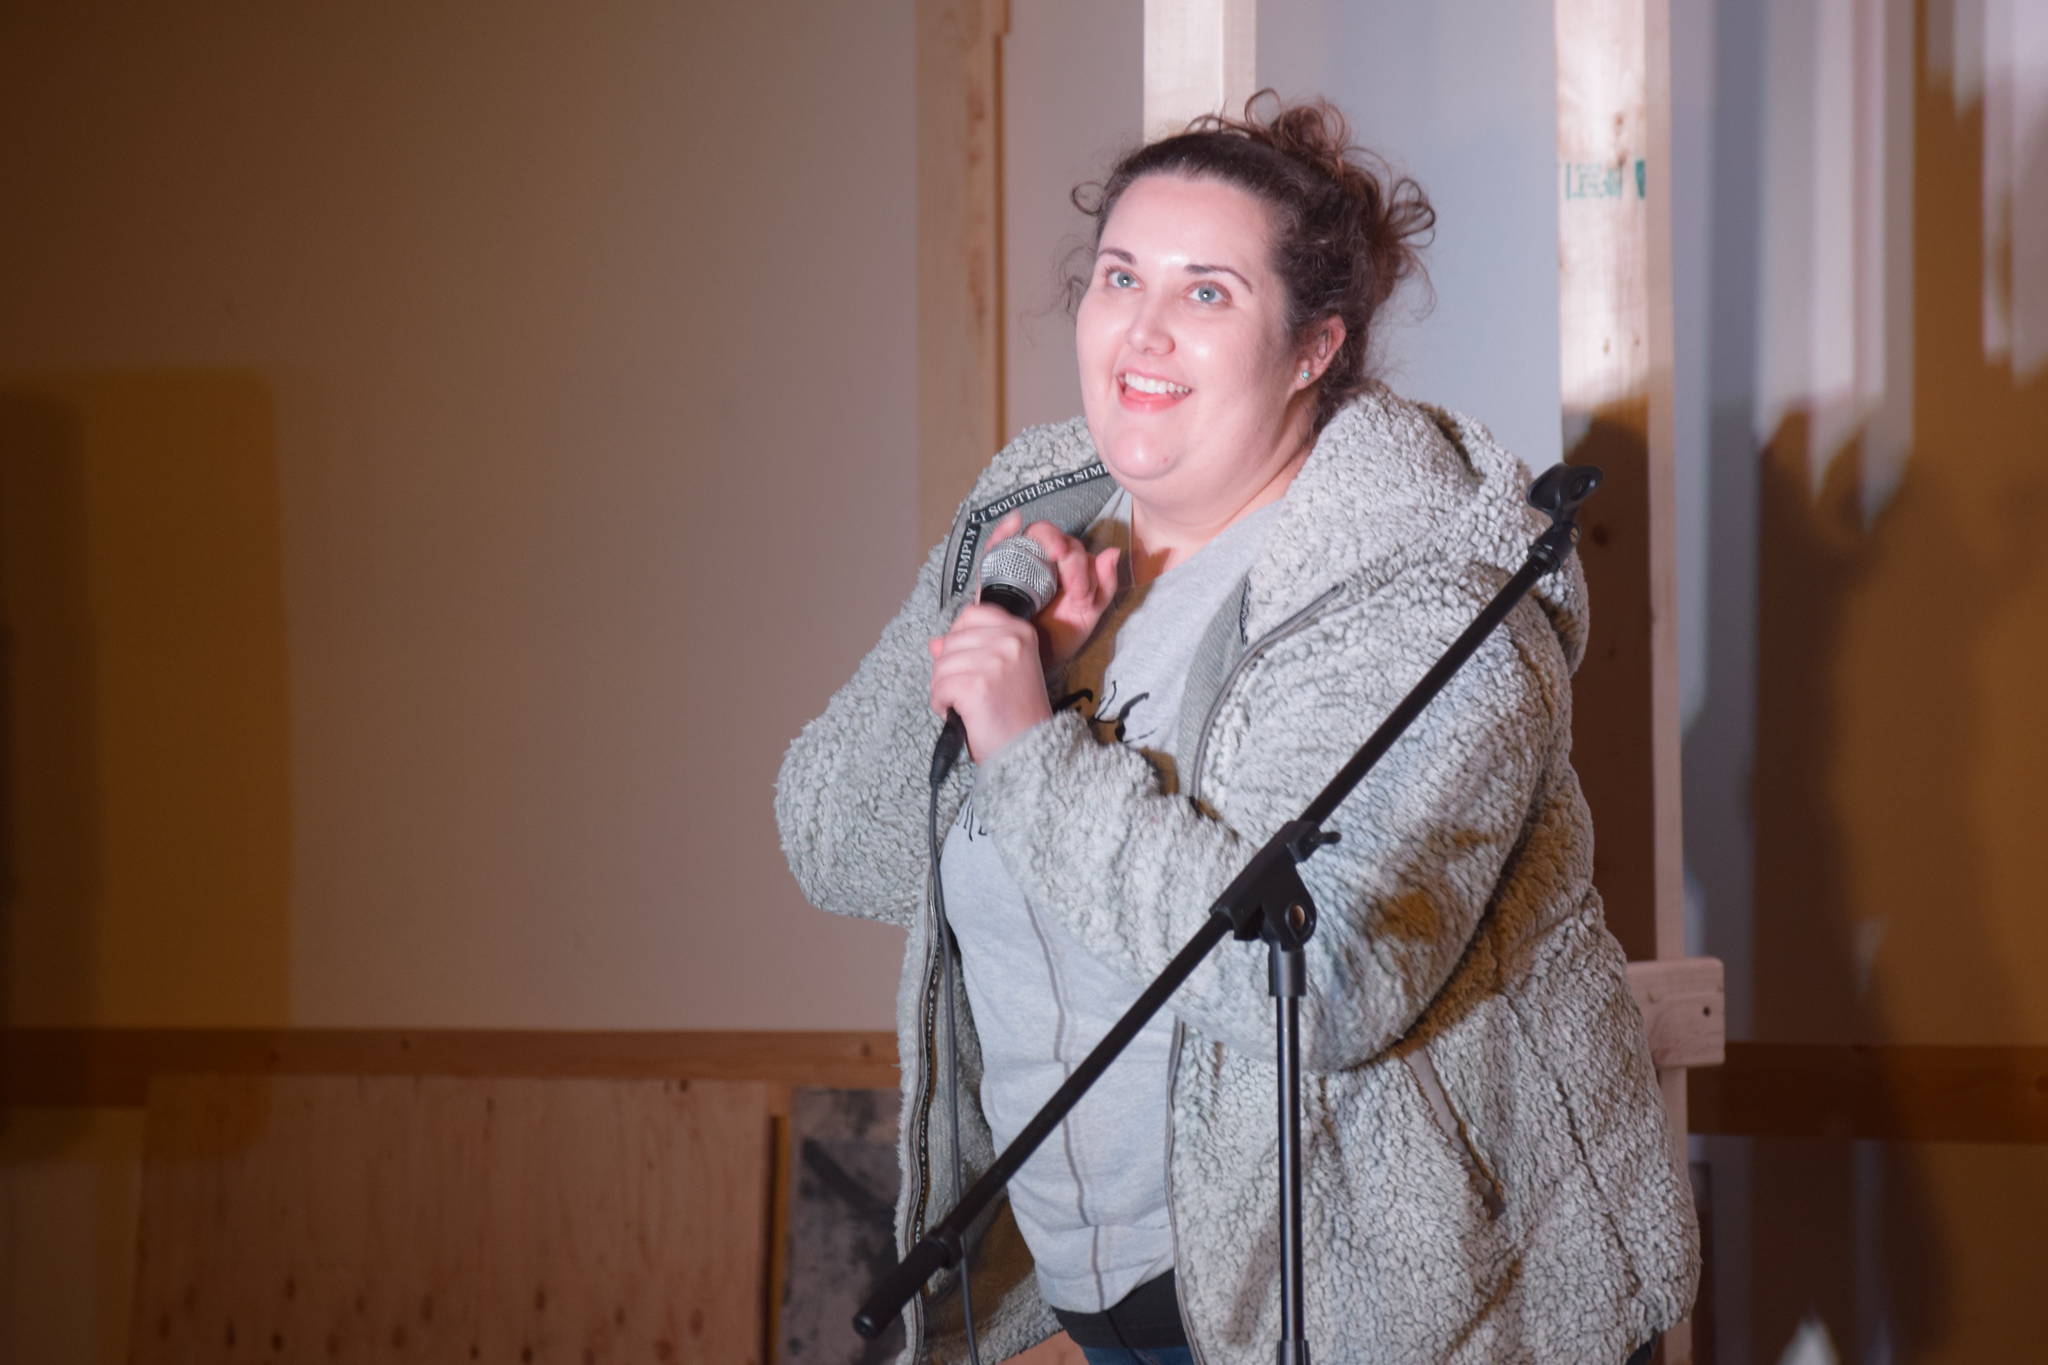 Kenai comedian Nikki Stein acts out talking to students during her routine at the Kenai Performers Theater on Thursday. (Photo by Brian Mazurek/Peninsula Clarion)